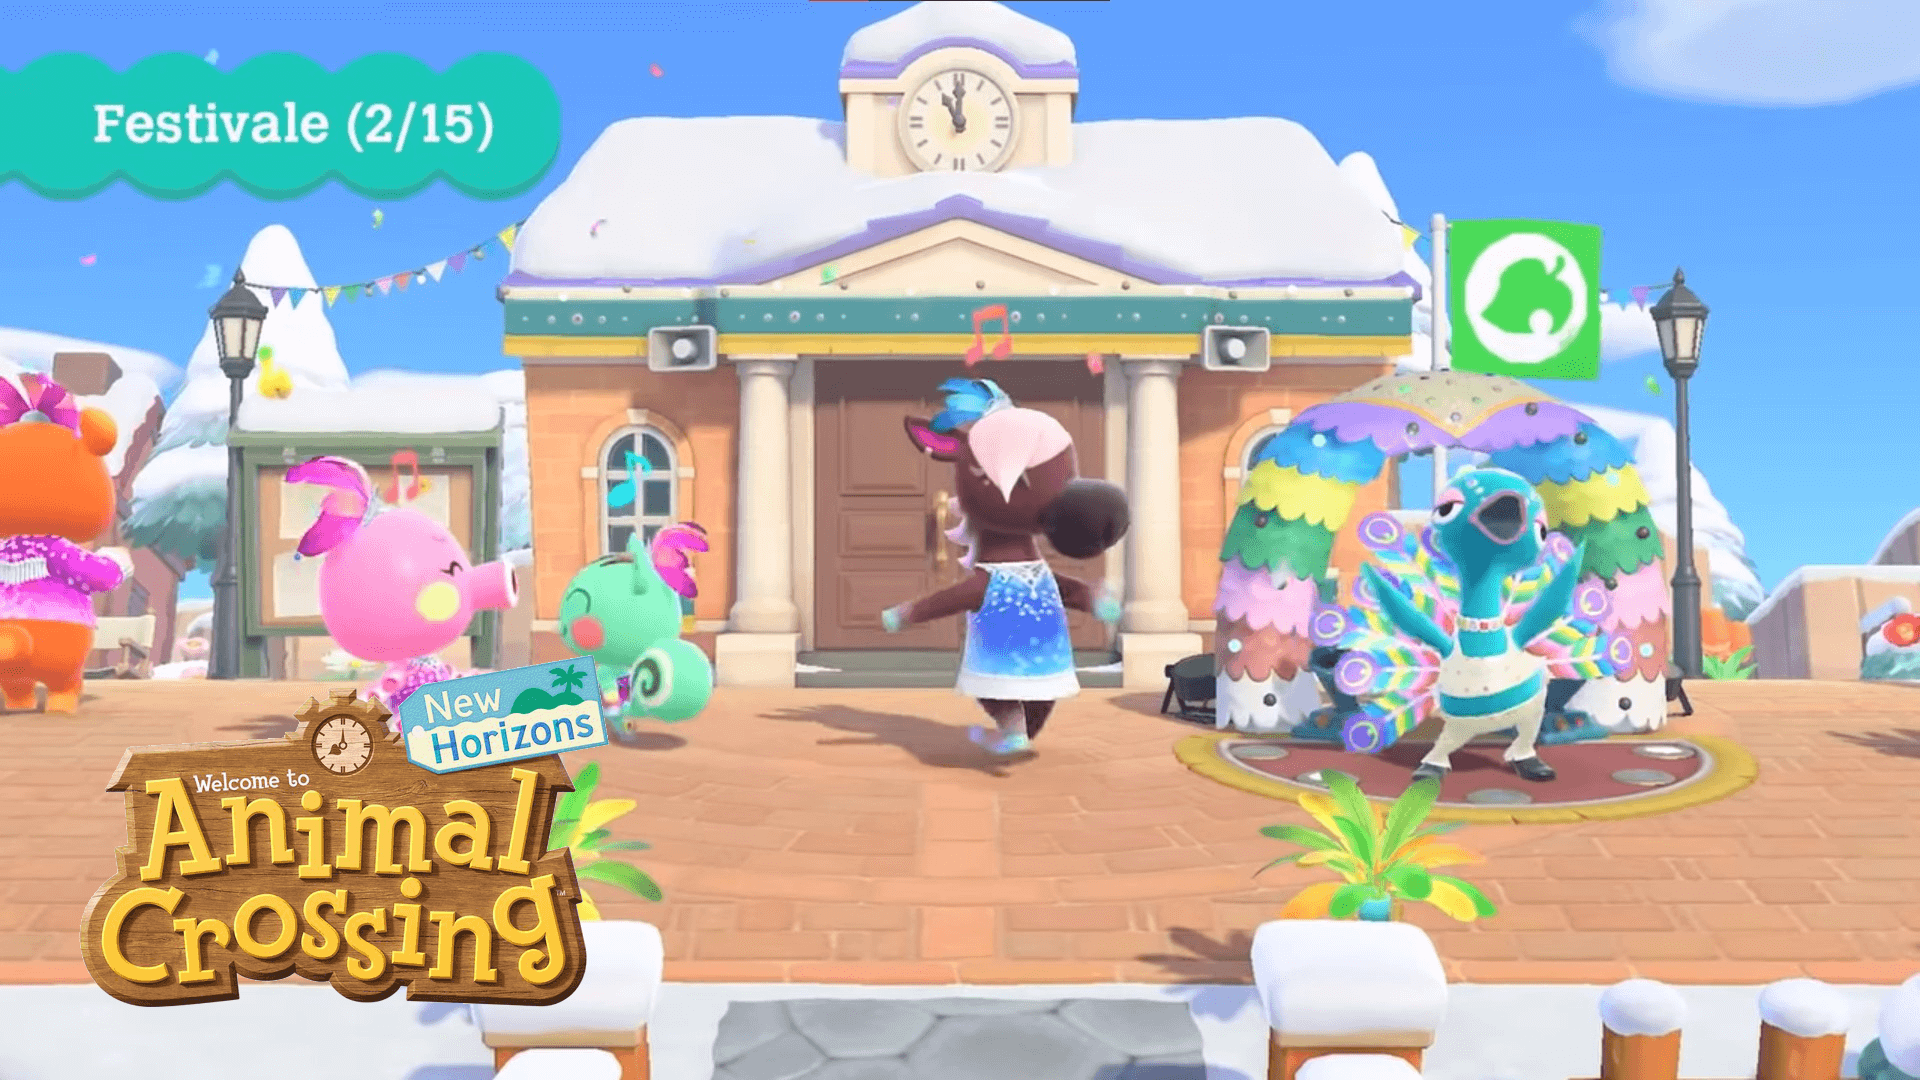 Animal Crossing New Horizons Brings The "Festivale" to Your Island